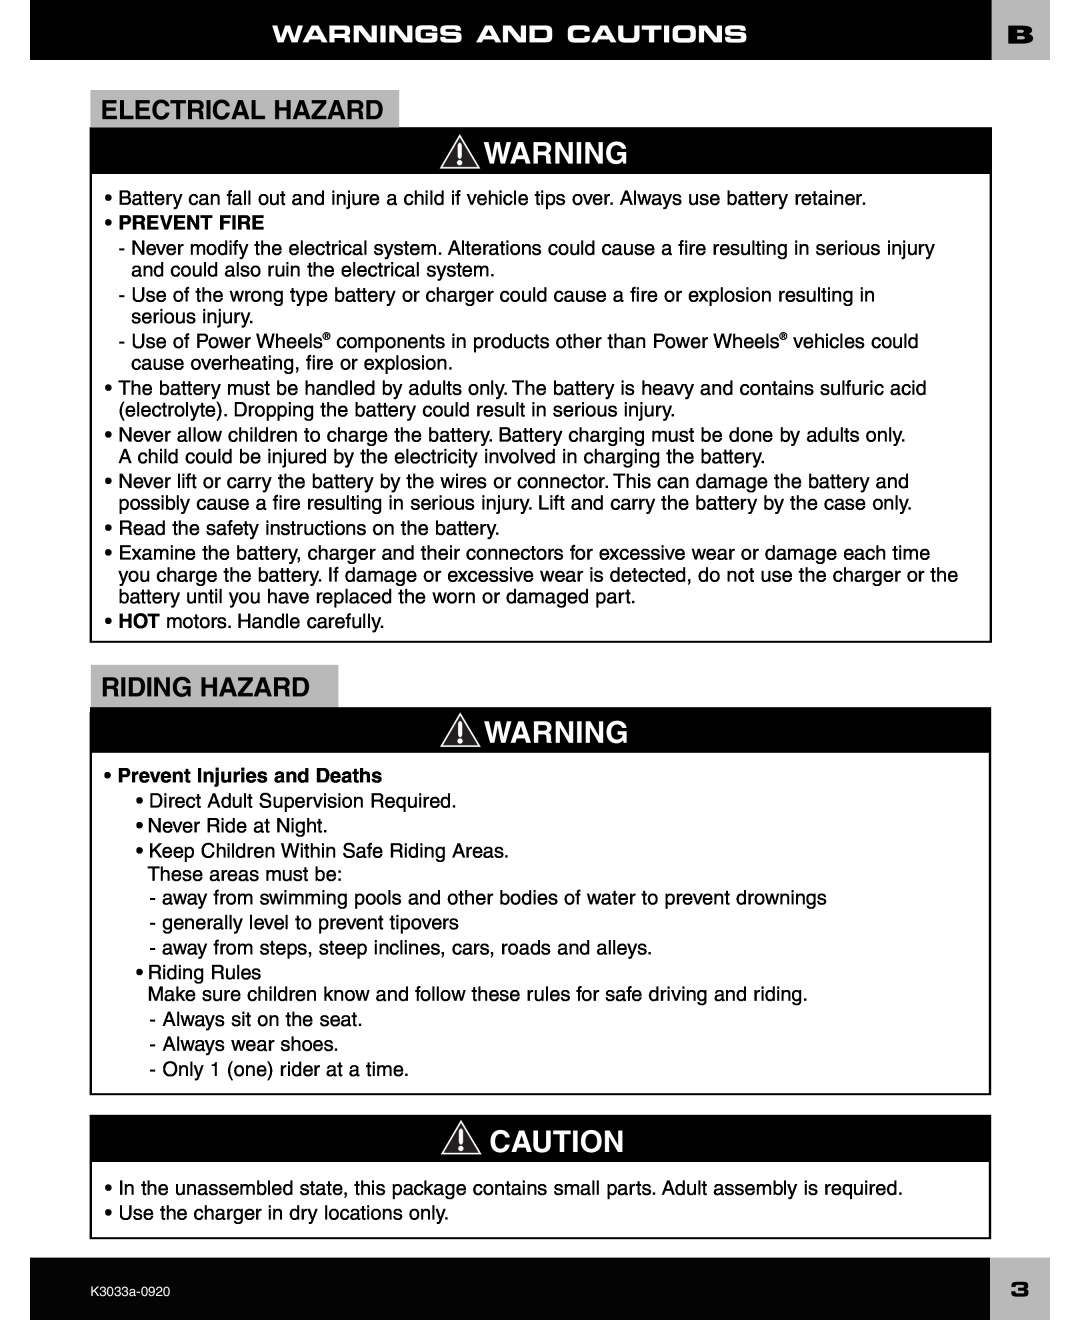 Ford F-150 owner manual Electrical Hazard, Riding Hazard, Warnings And Cautions, Prevent Fire, Prevent Injuries and Deaths 